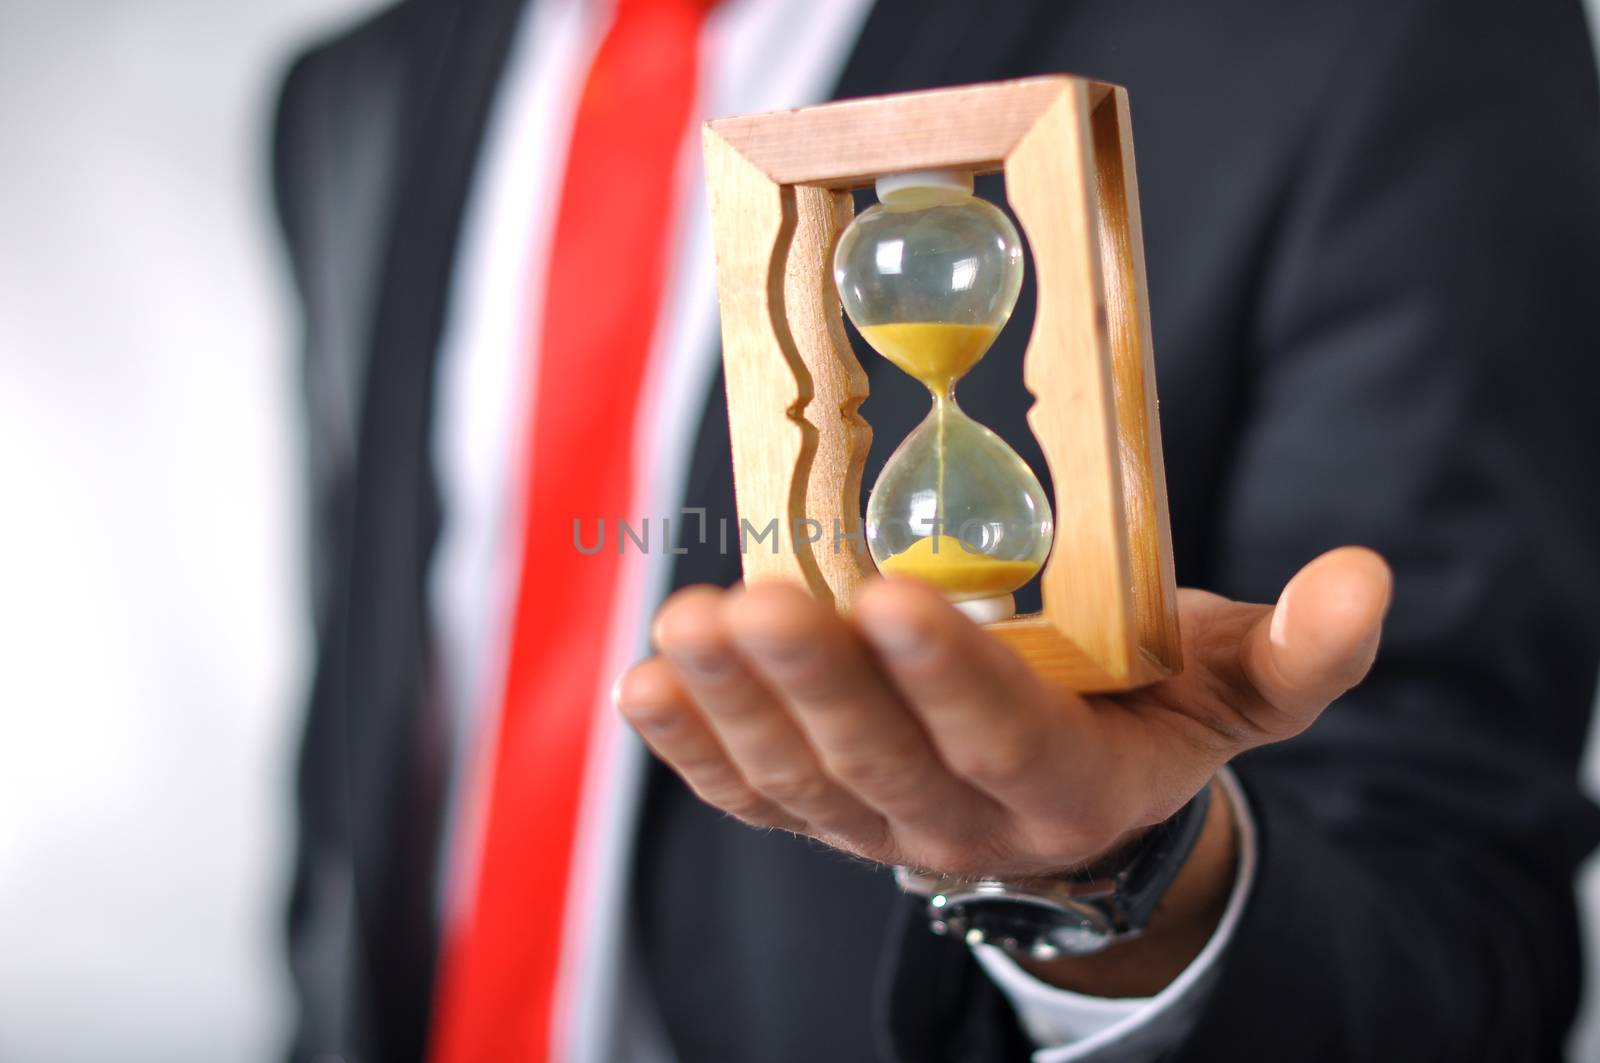 Man in a suit with tie holding an hourglass